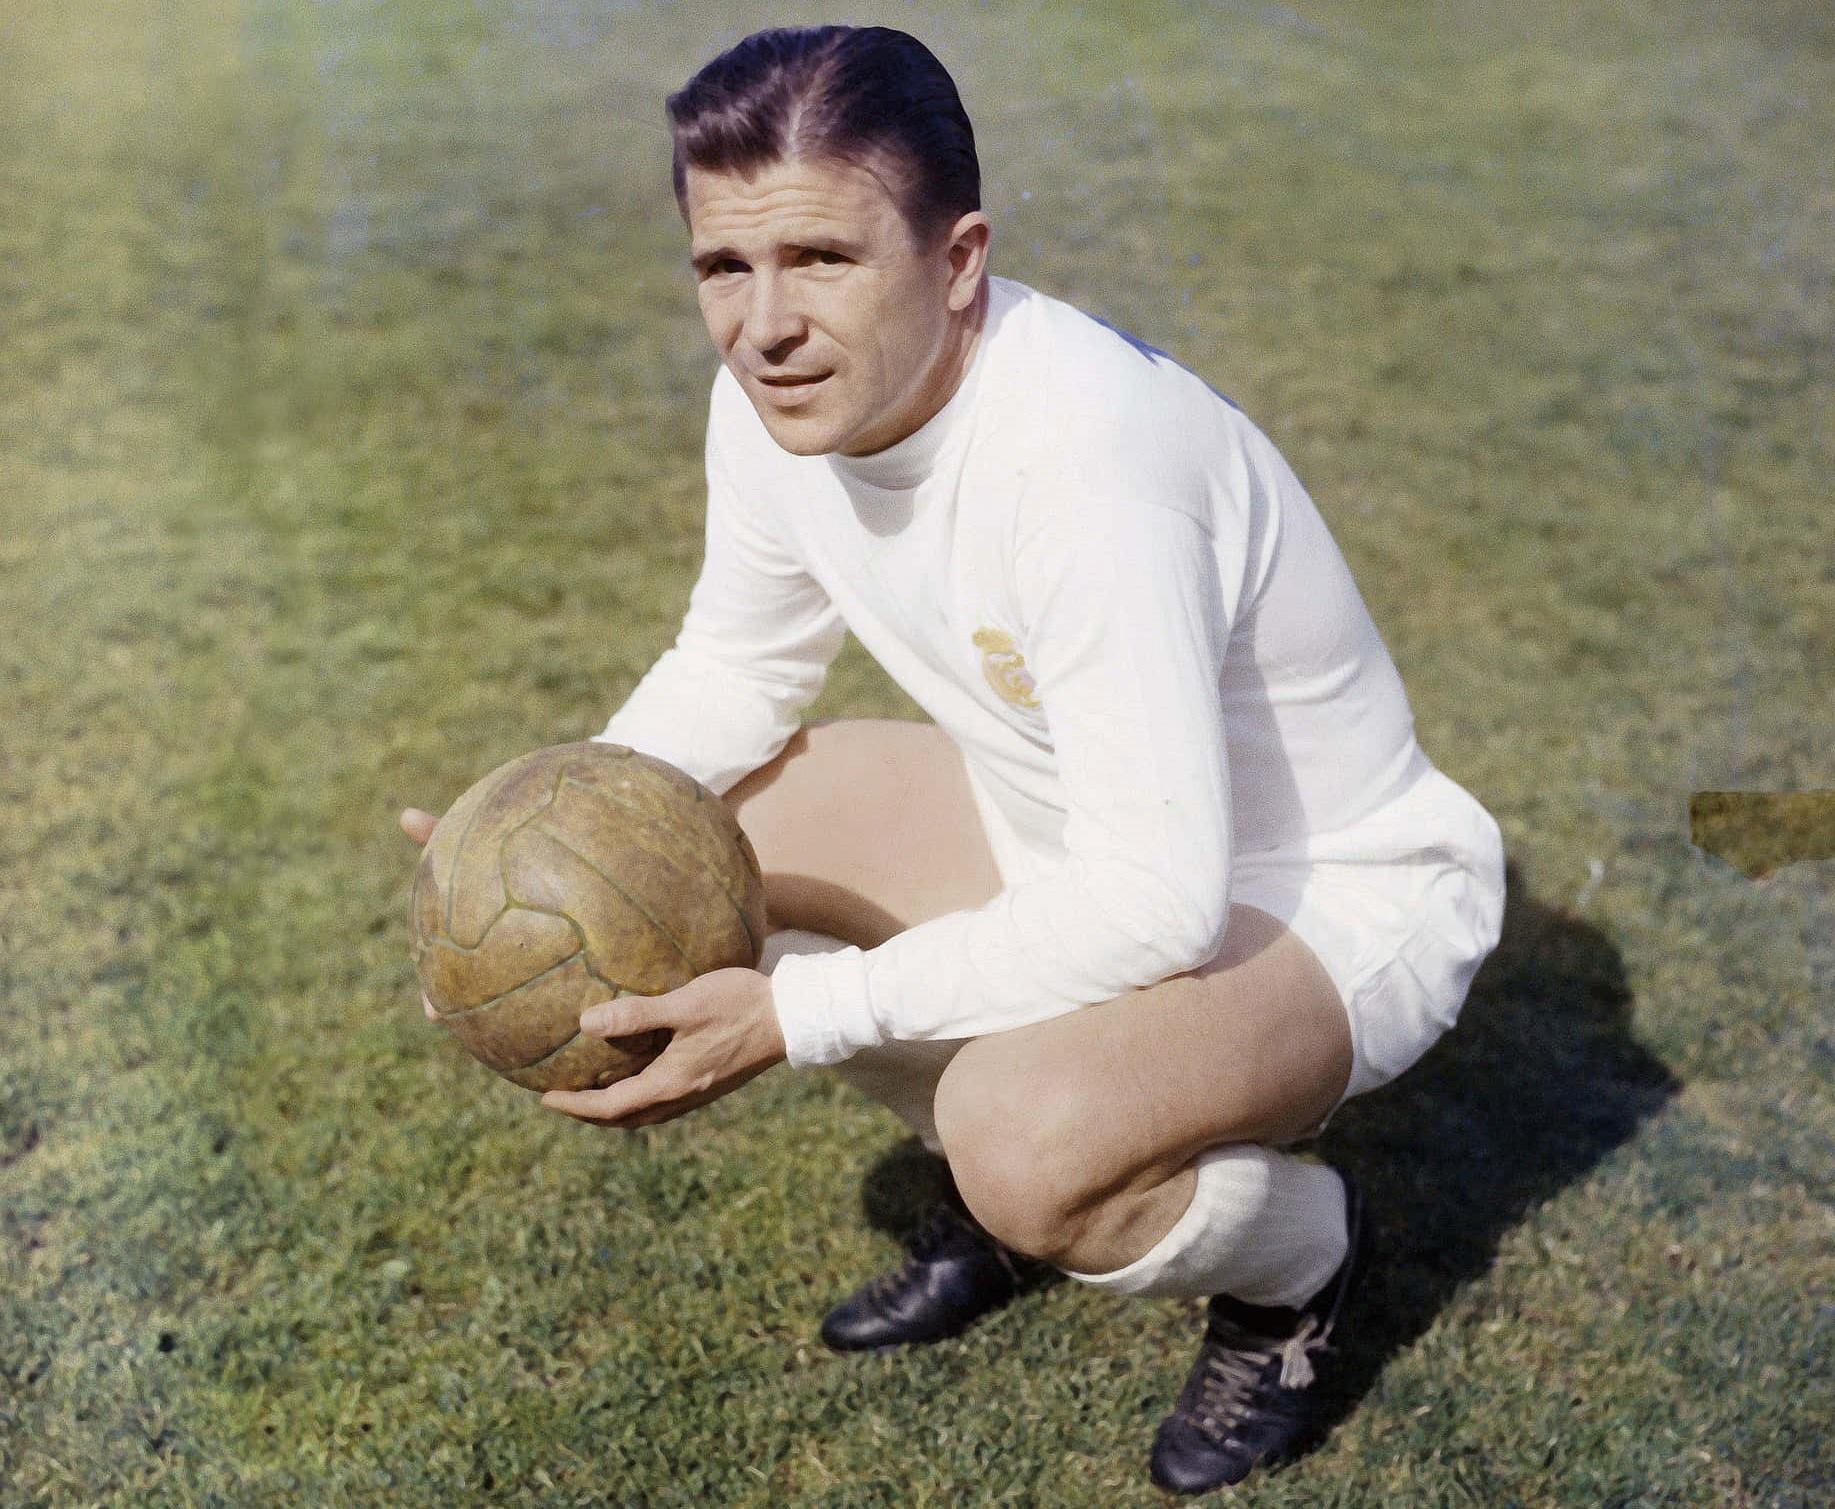 15-facts-about-ferenc-puskas